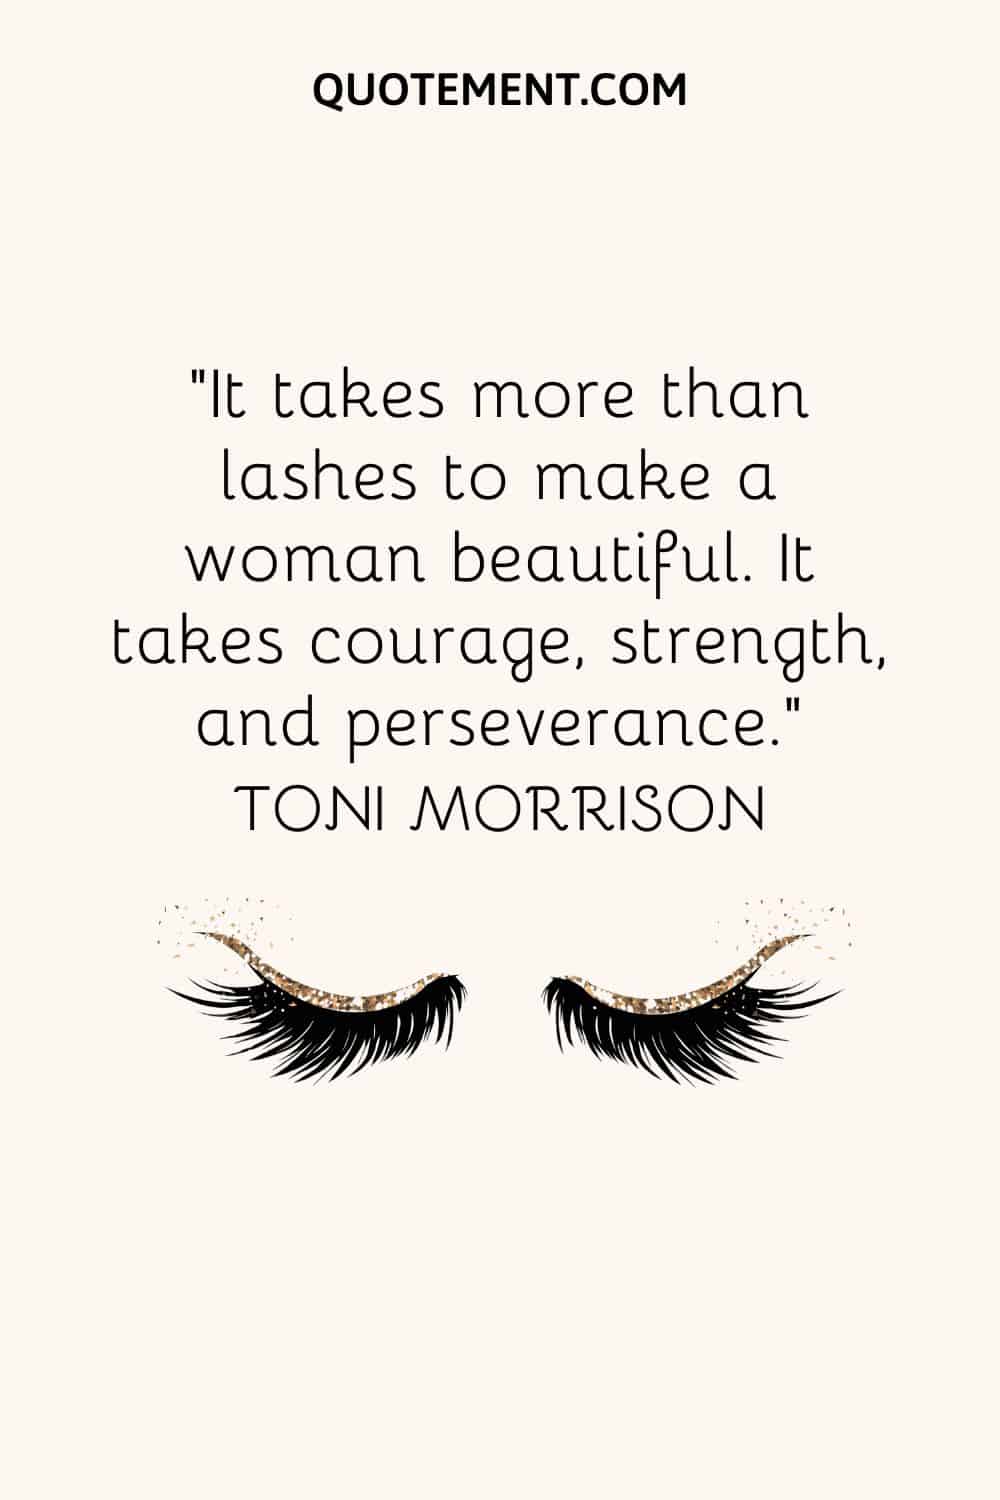 It takes more than lashes to make a woman beautiful